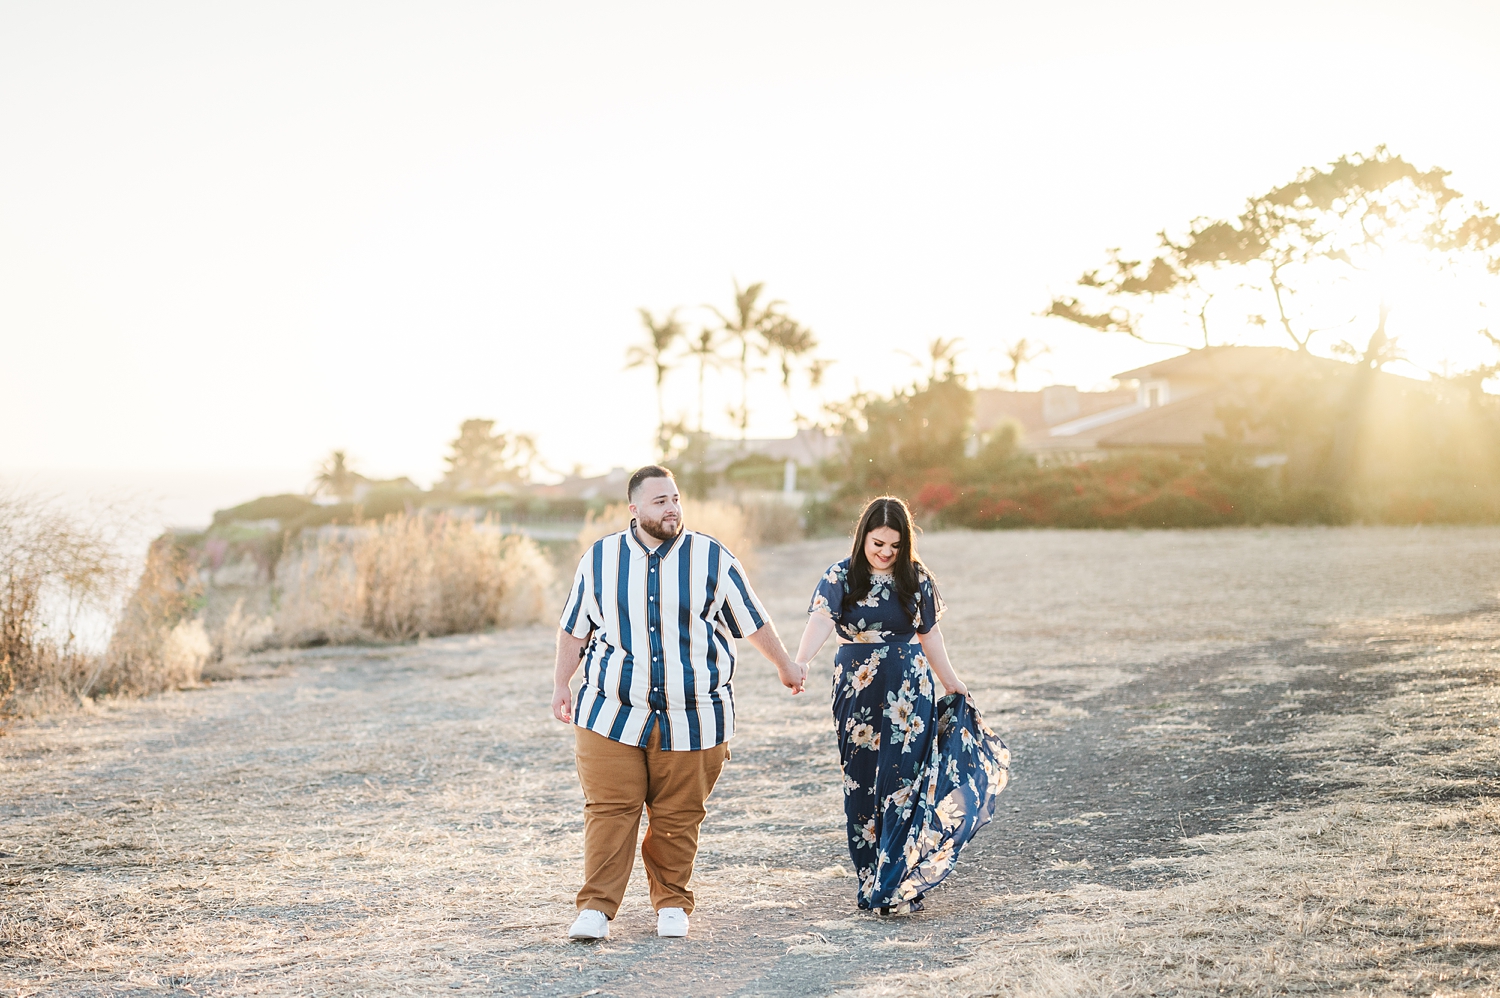 Beach Cliffs Engagement Session at Sunset | Nataly Hernandez Photography | Edwin and Susana-67.jpg